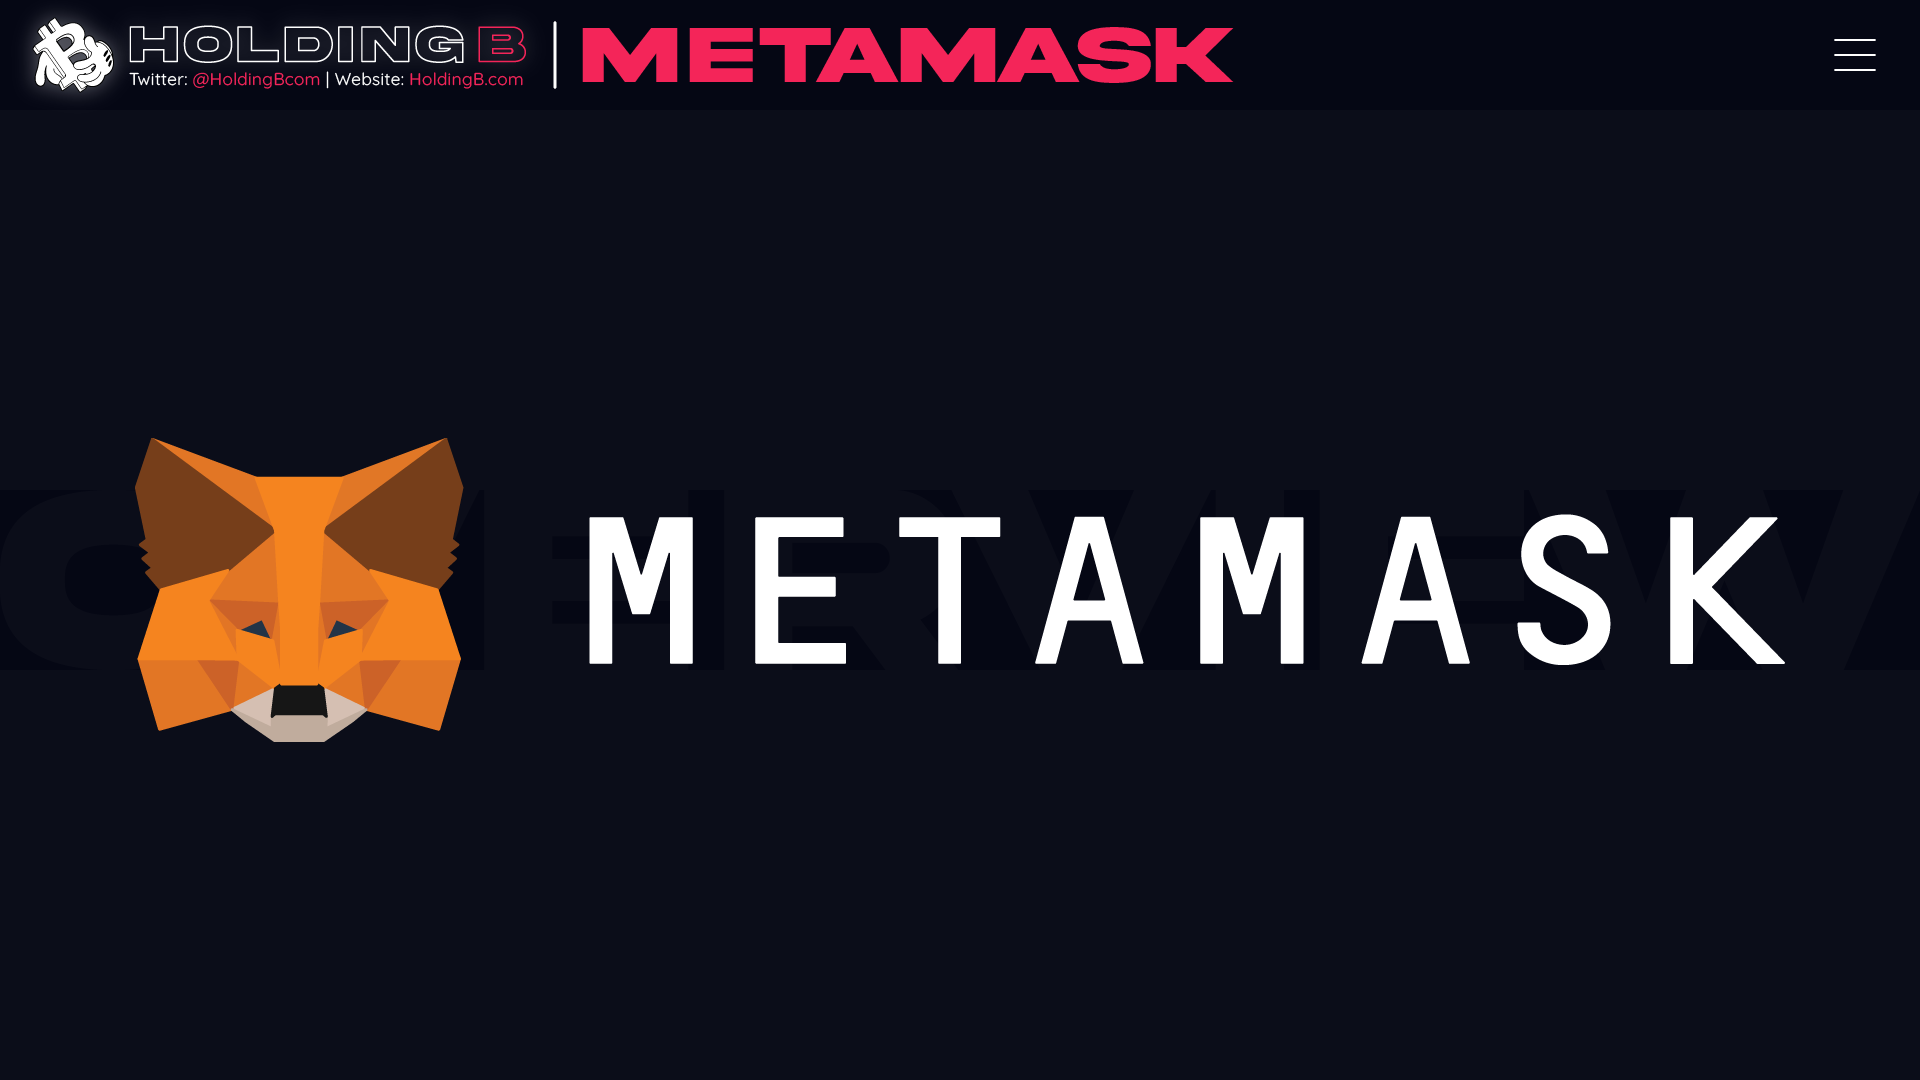 WHAT IS A METAMASK WALLET?